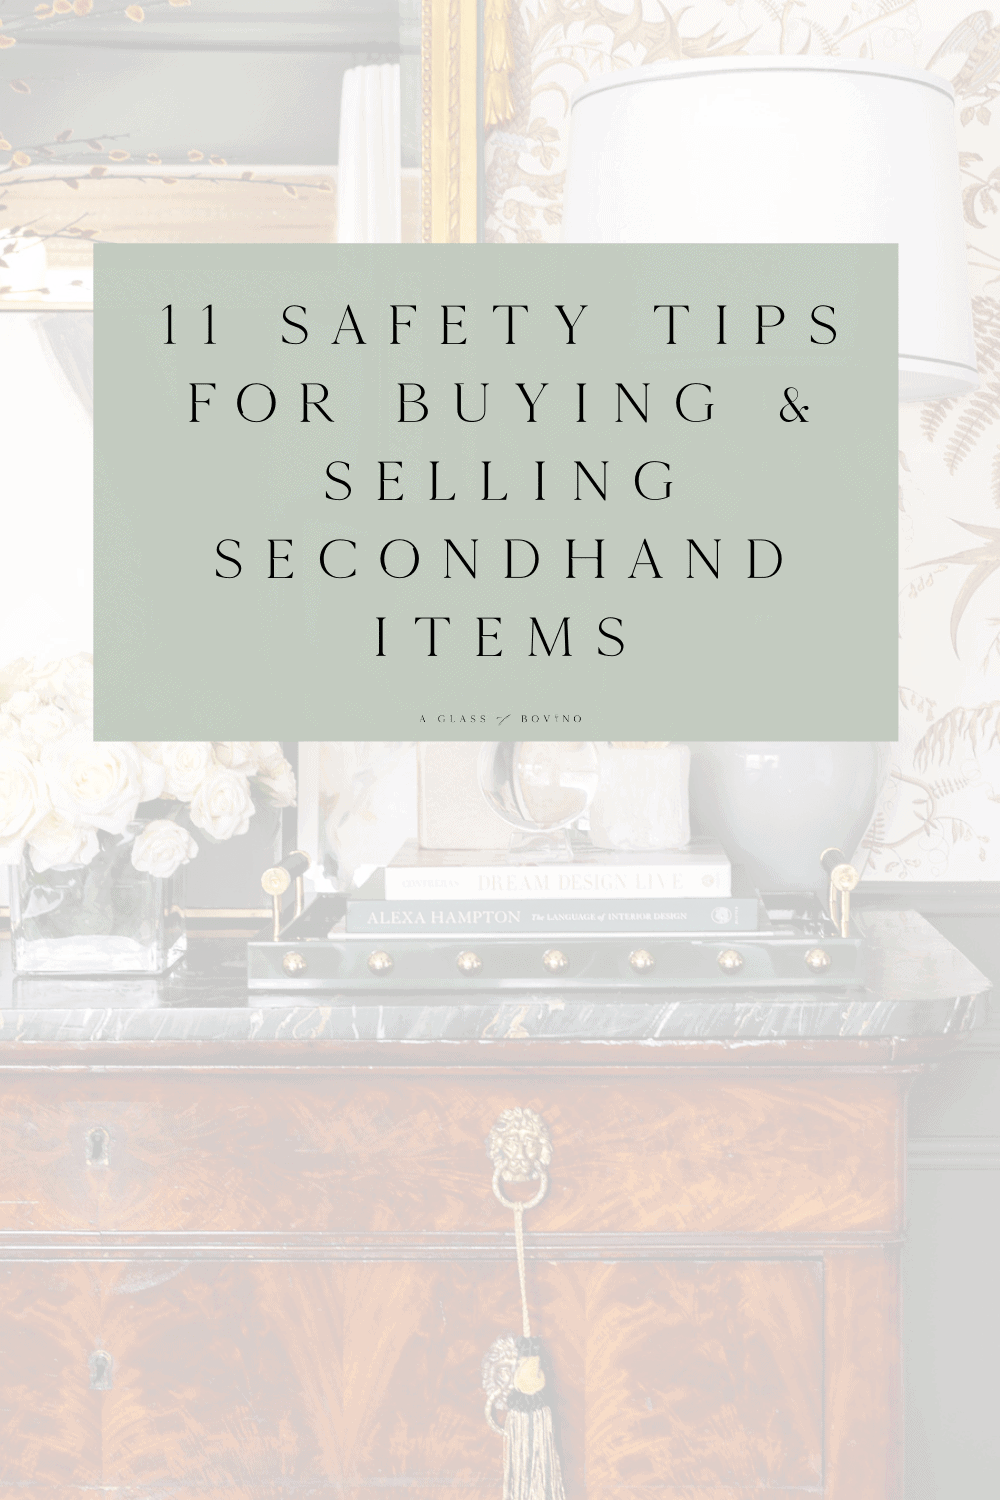 safety-tips-for-buying-selling-secondhand-items-facebook-marketplace-craigslist